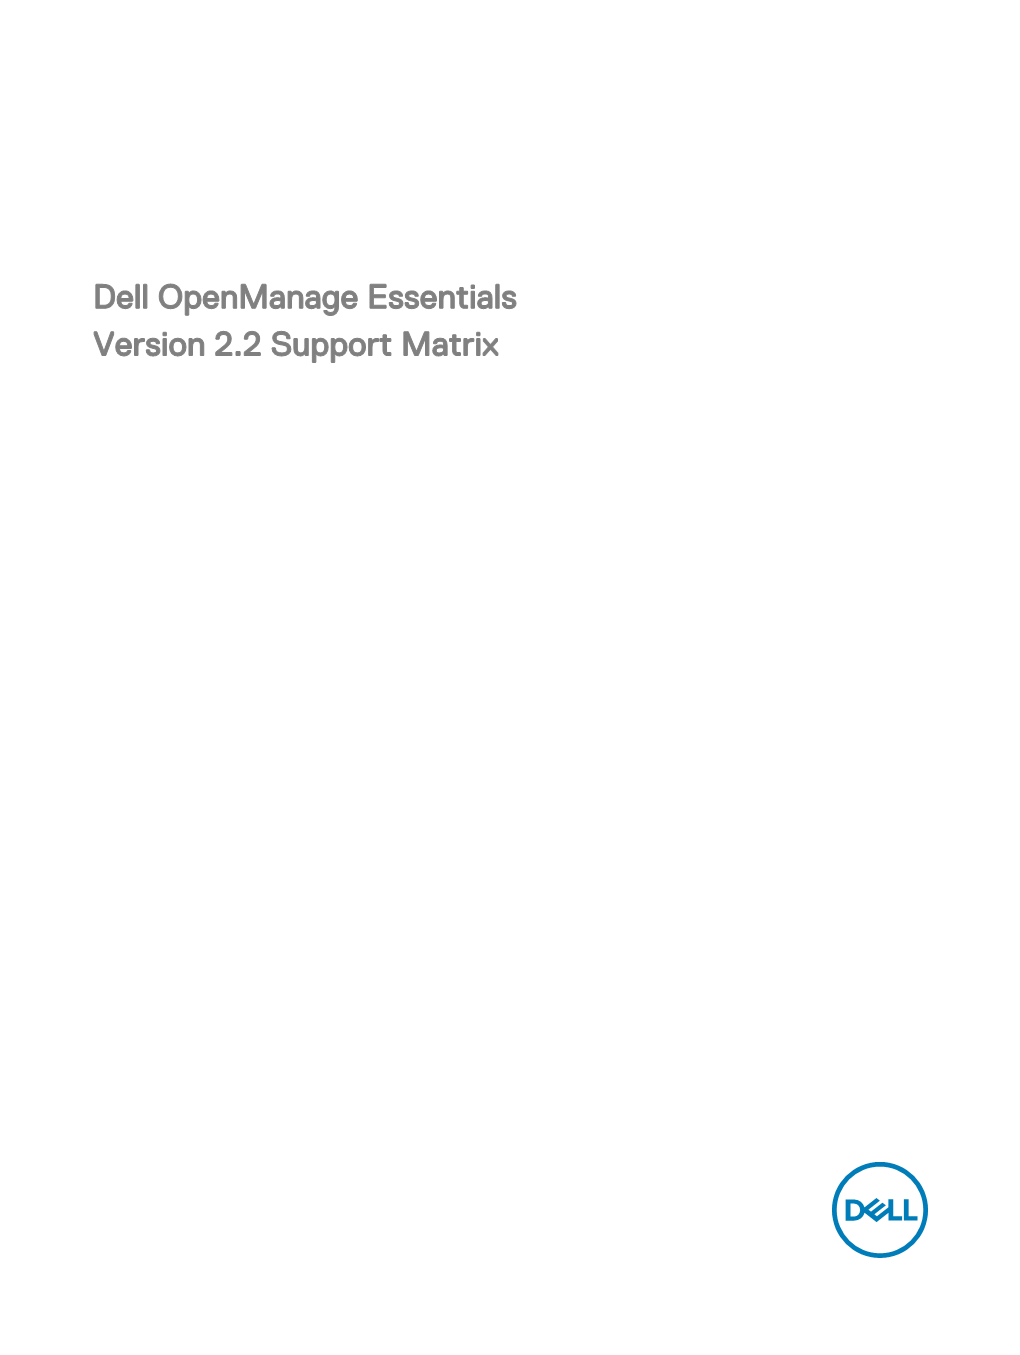 Dell Openmanage Essentials Version 2.2 Support Matrix Notes, Cautions, and Warnings